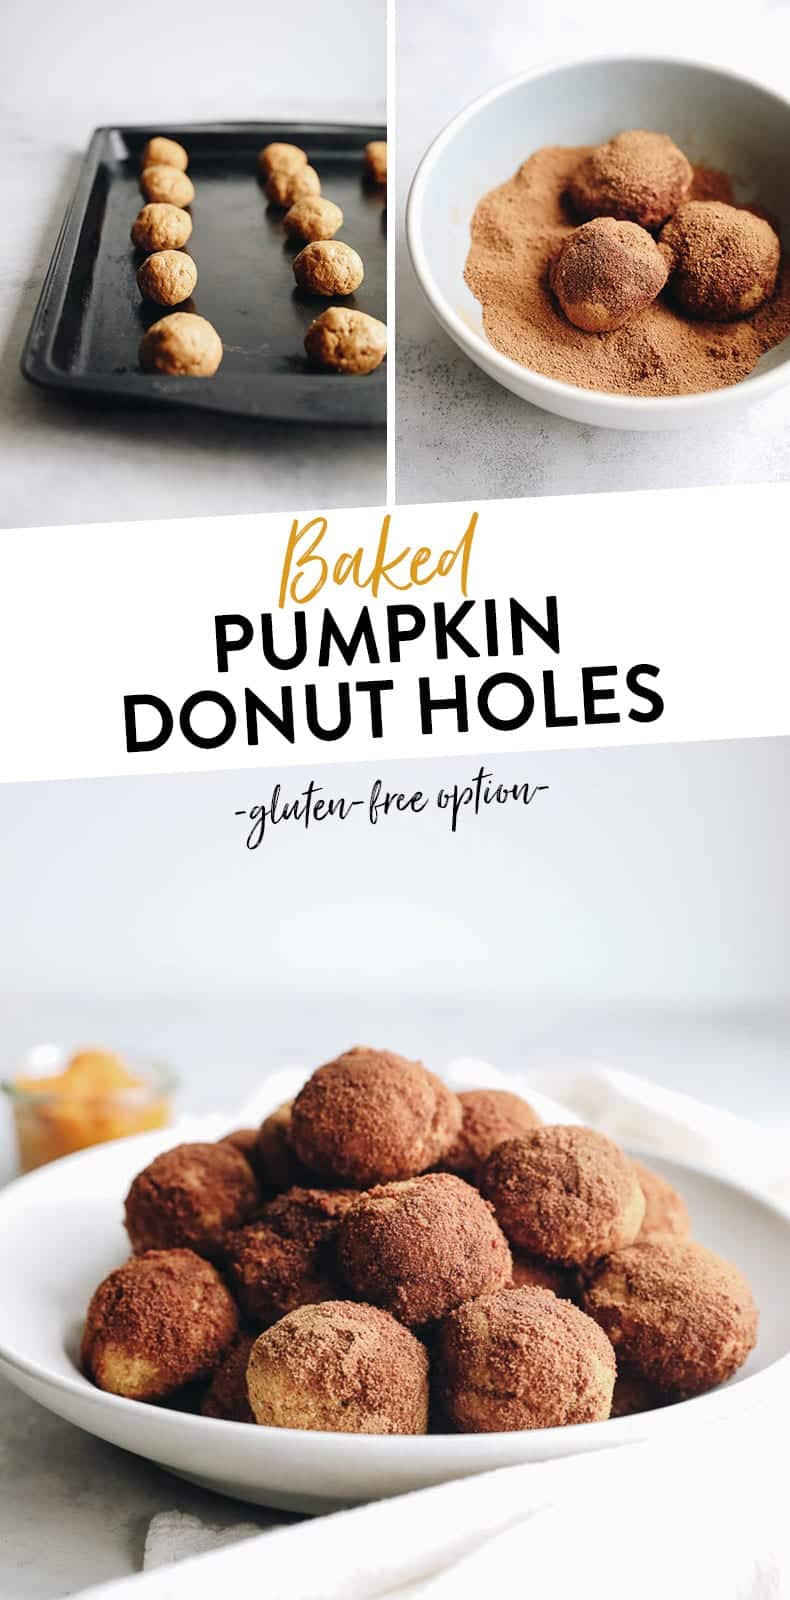 Get the taste of fall with these baked pumpkin donut holes made with healthy ingredients like coconut oil and coconut sugar and baked in the oven. Gluten-free or non-gluten-free options available so the whole family can enjoy